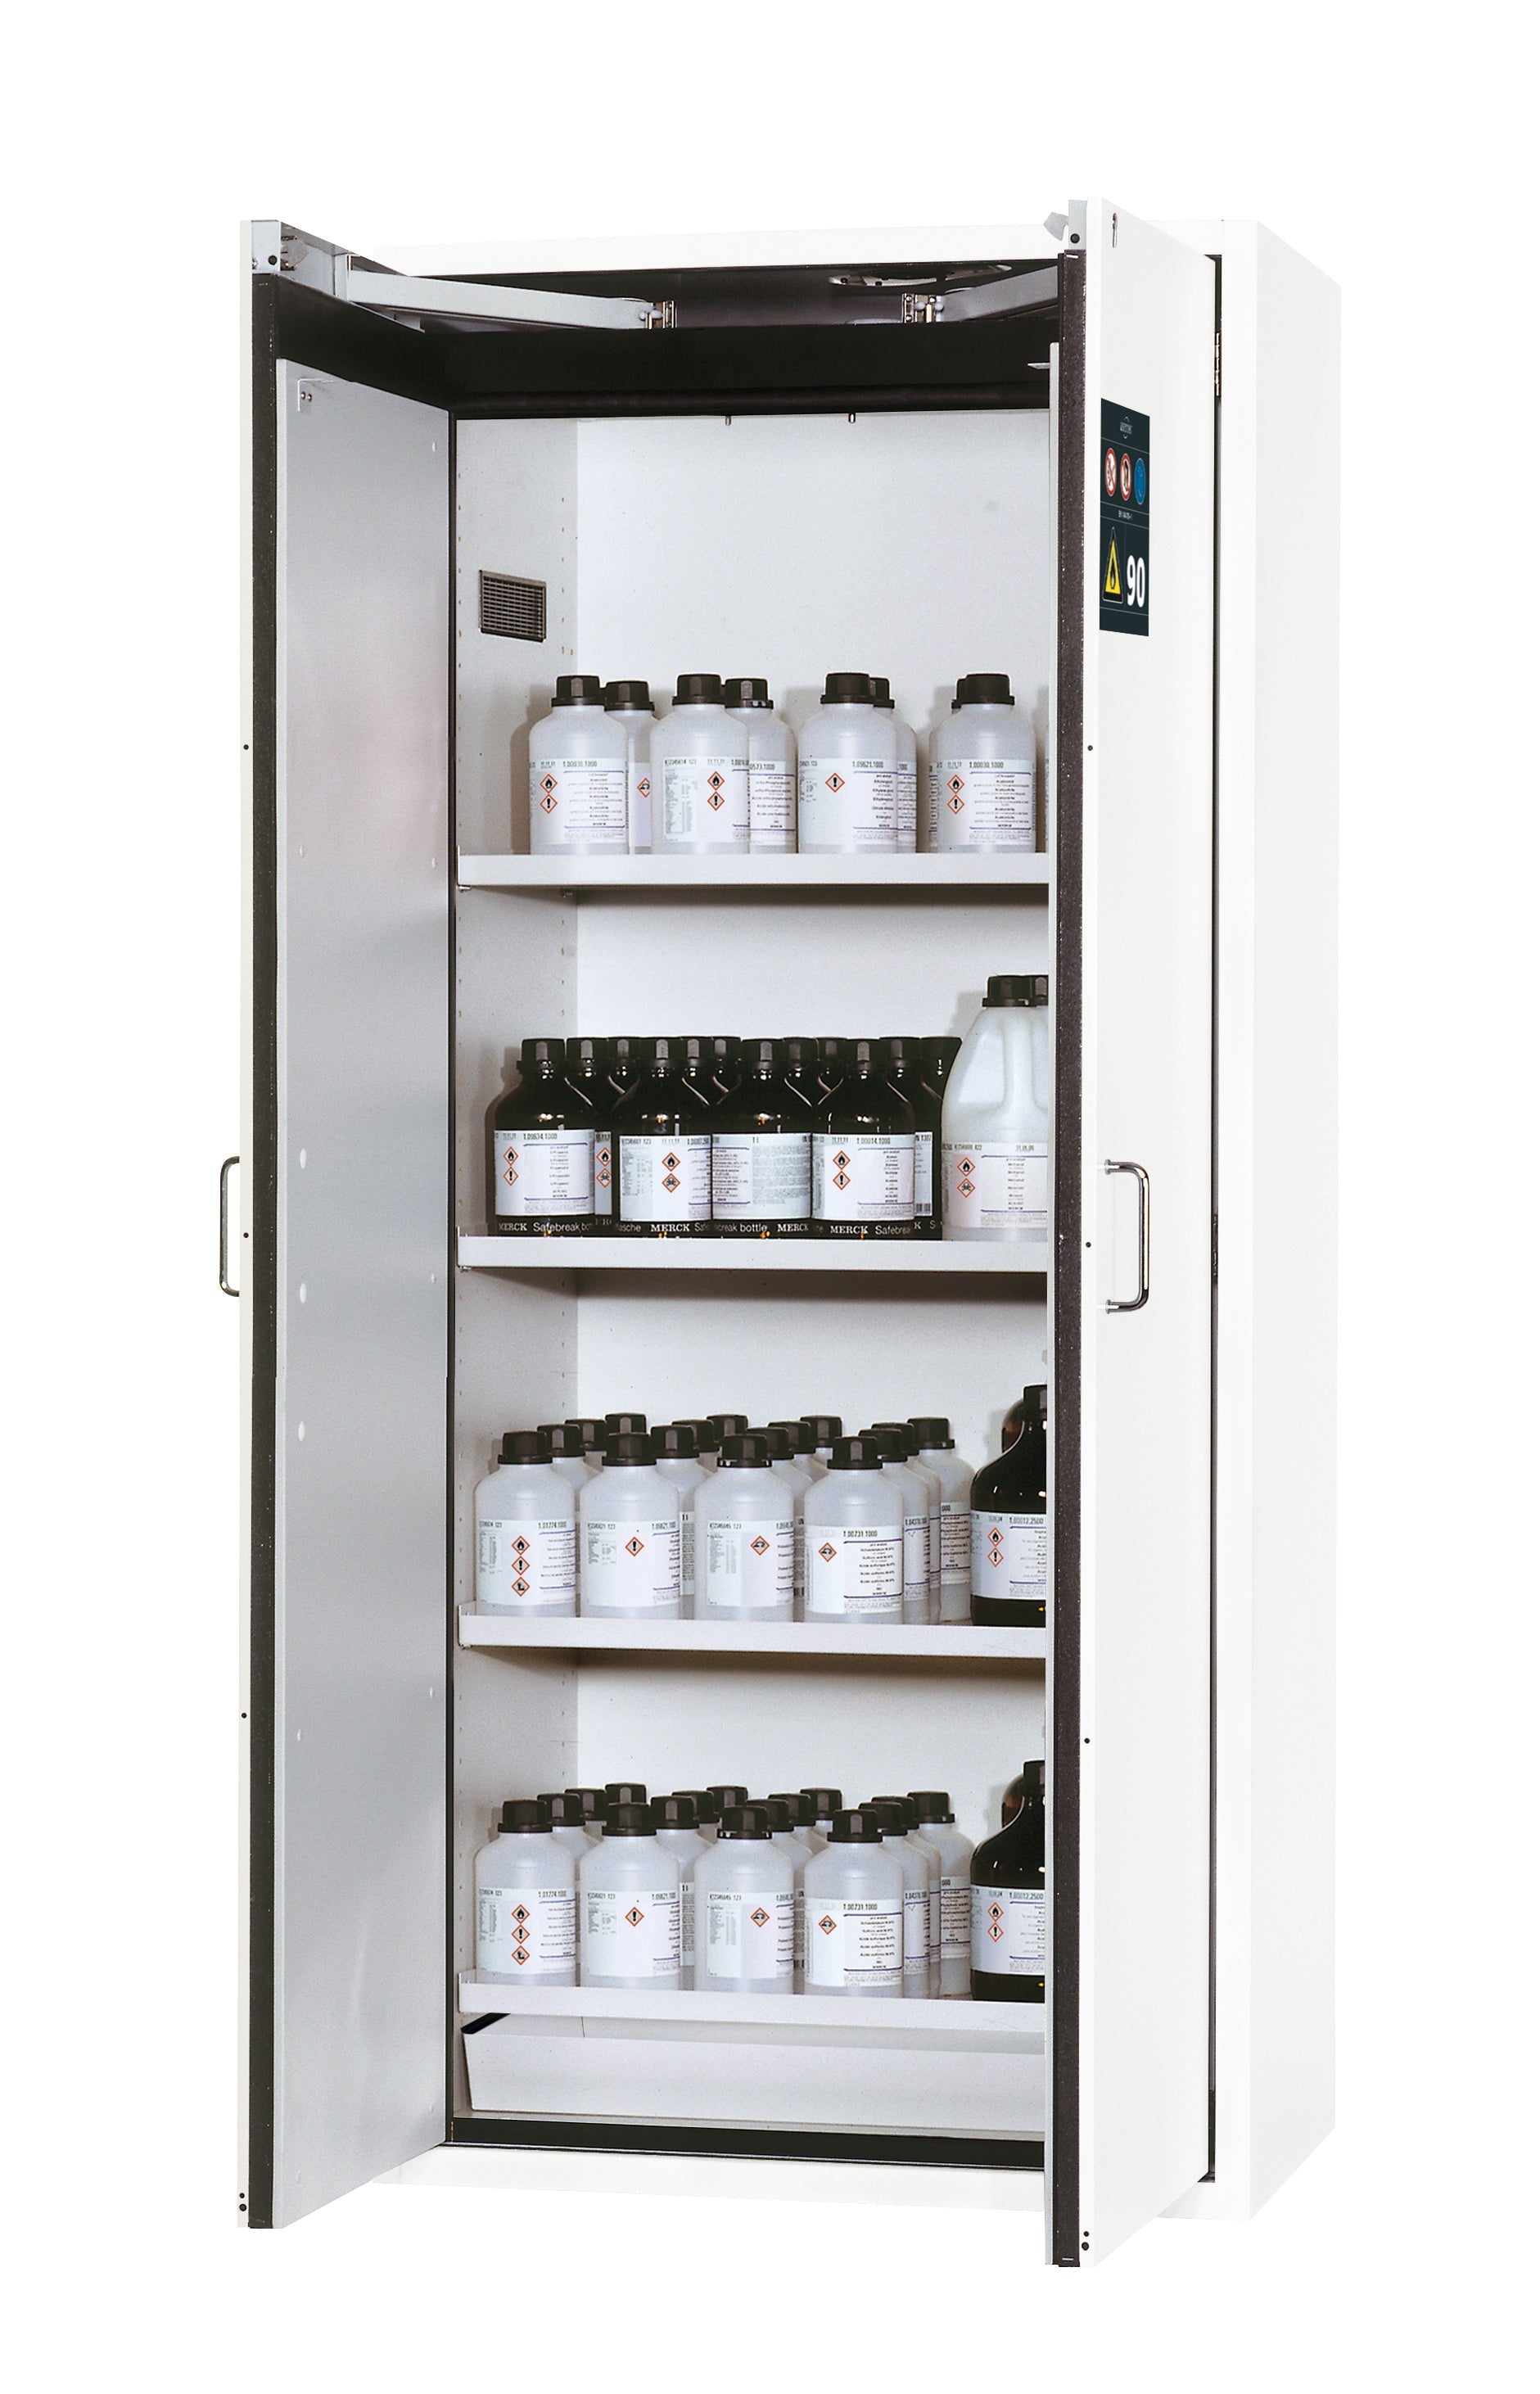 Type 90 safety cabinet S-CLASSIC-90 model S90.196.090.WDAS in laboratory white (similar to RAL 9016) with 4x standard shelves (sheet steel)